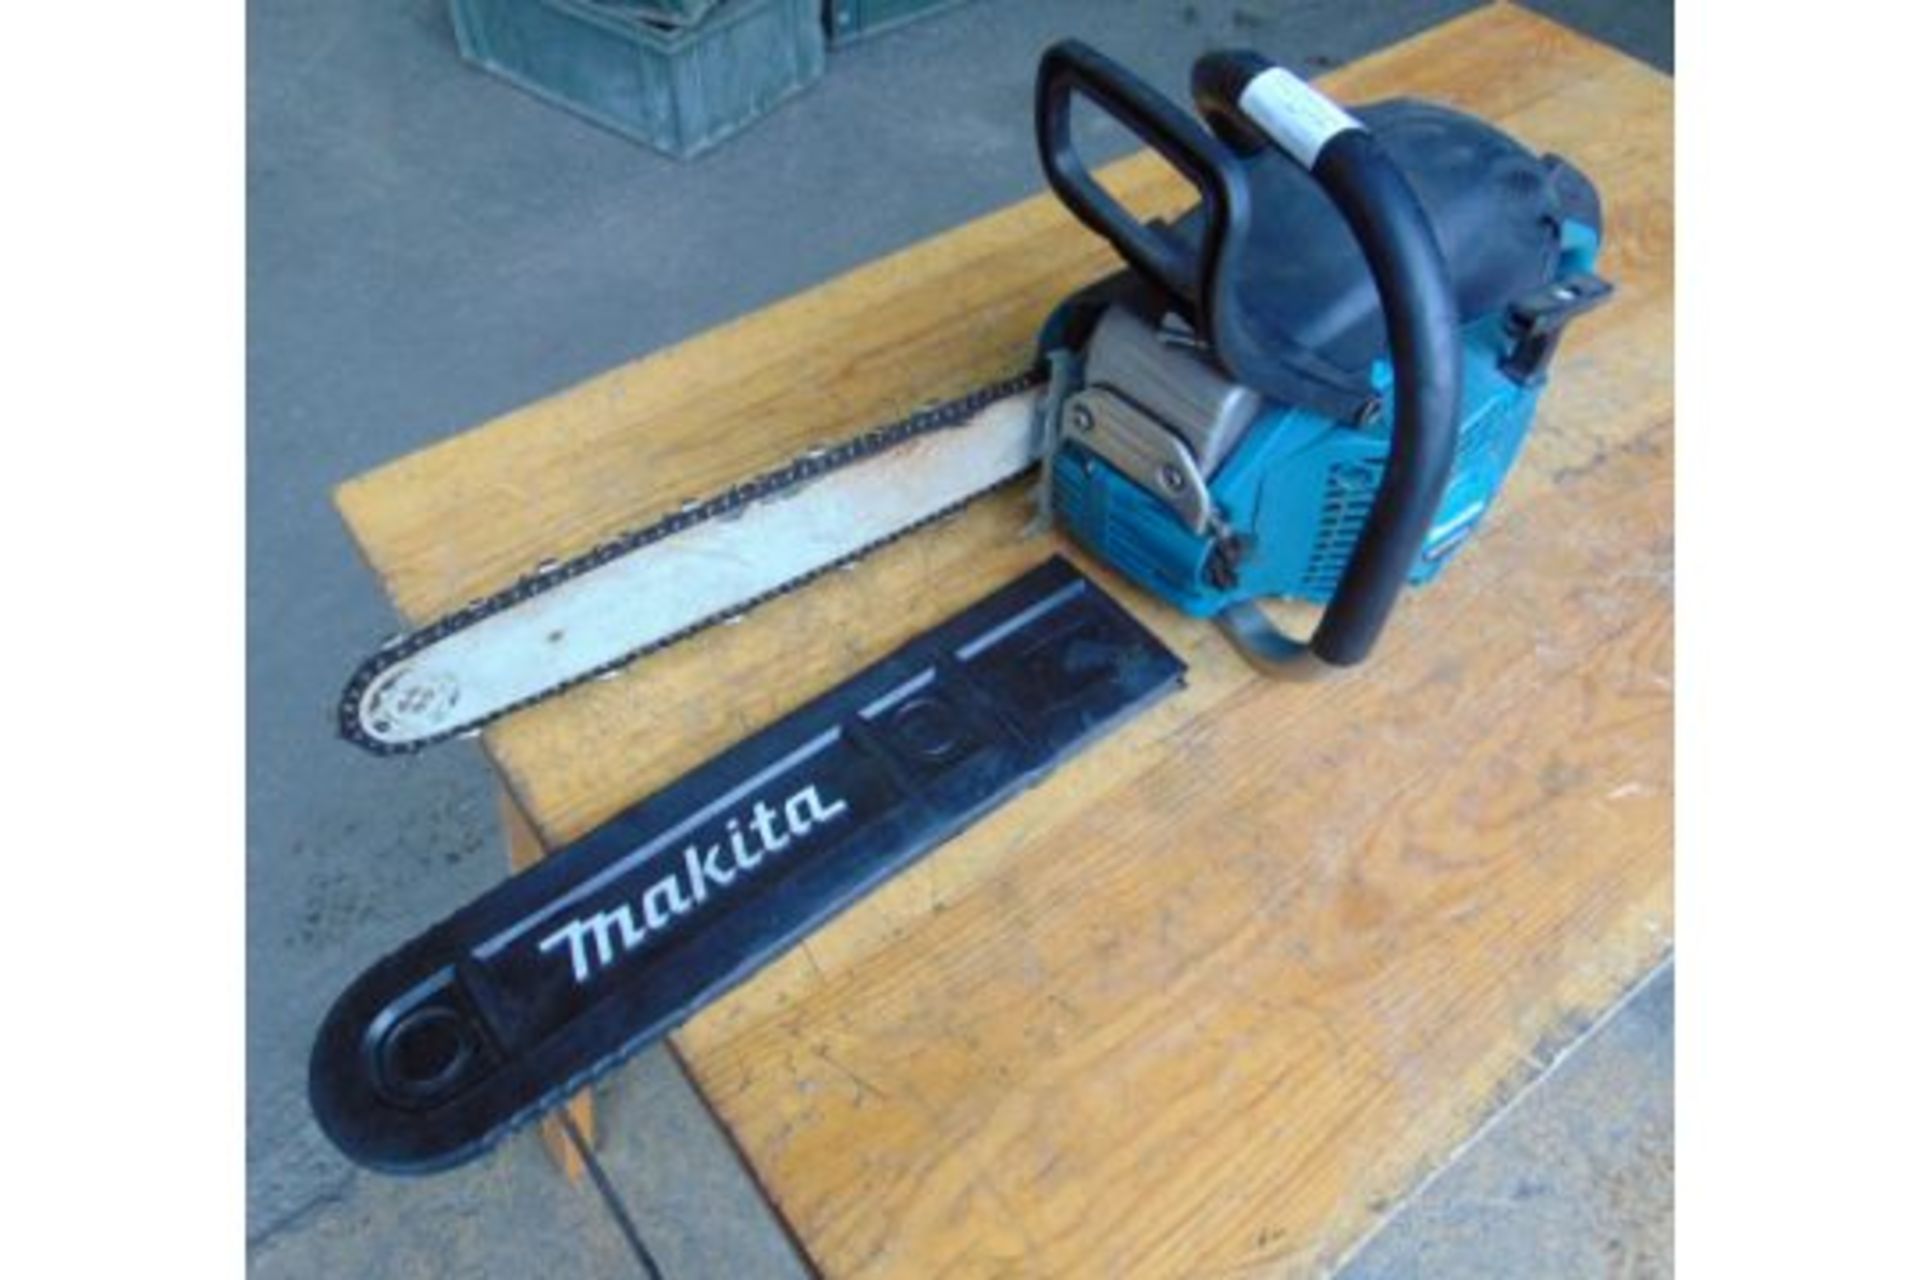 MAKITA DCS 5030 50CC Chainsaw c/w Chain Guard from MoD. - Image 3 of 4